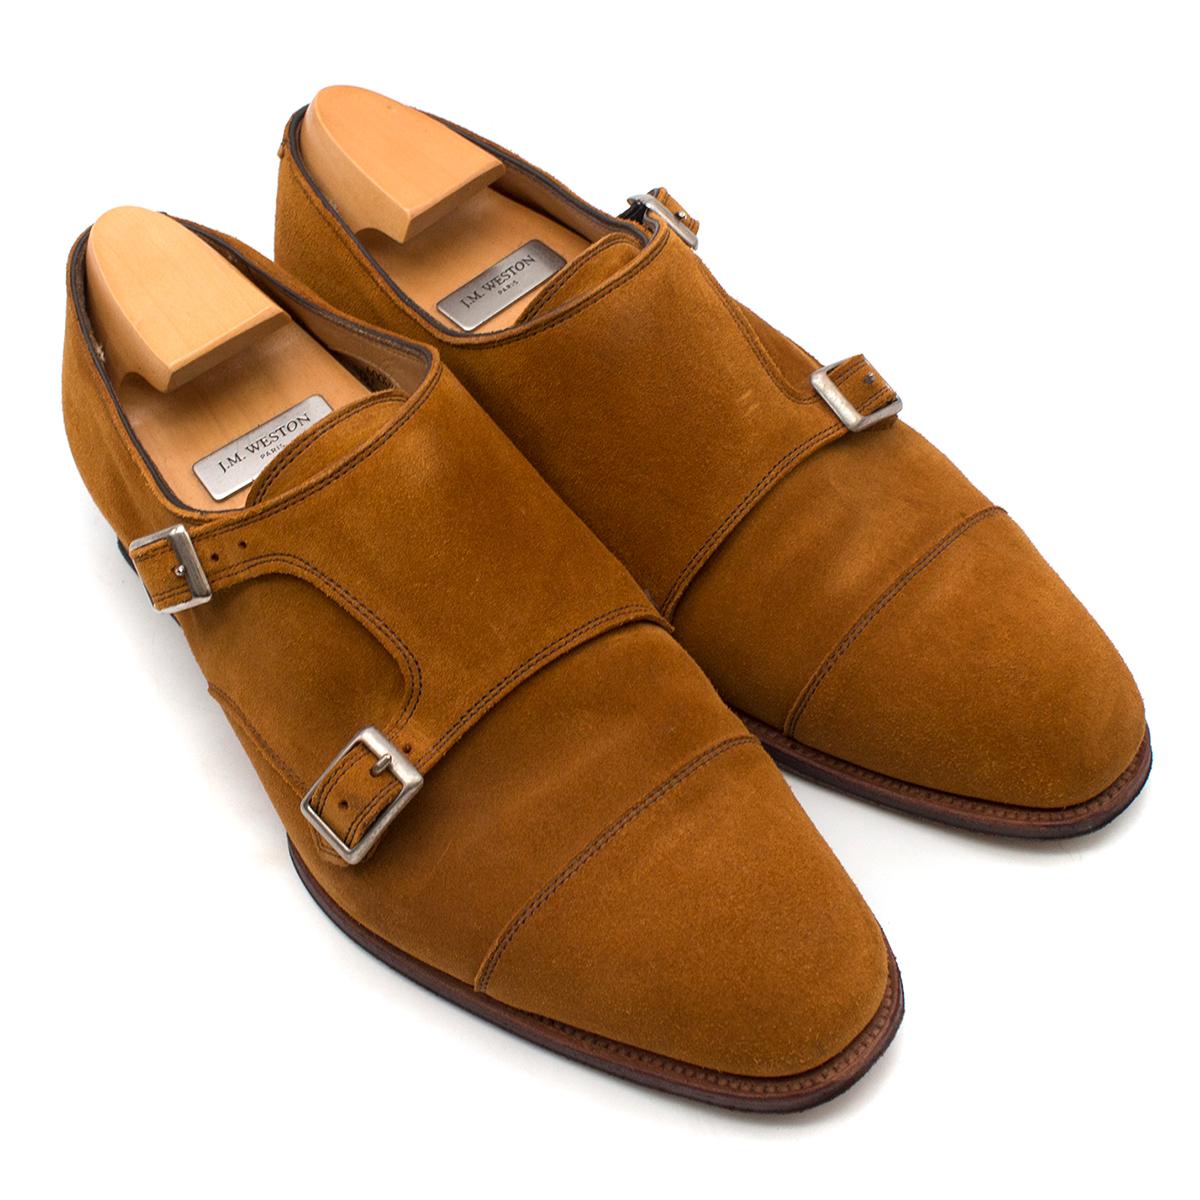 Hardy Amies Tan-brown Suede Double Monk Shoes

- Tan-brown suede monk shoes
- Double monk straps
- Smart round toe shape
- Nude leather lining with logo embroidered
- Leather soles
- Low heel
- This item comes with an alternative branded shoe trees